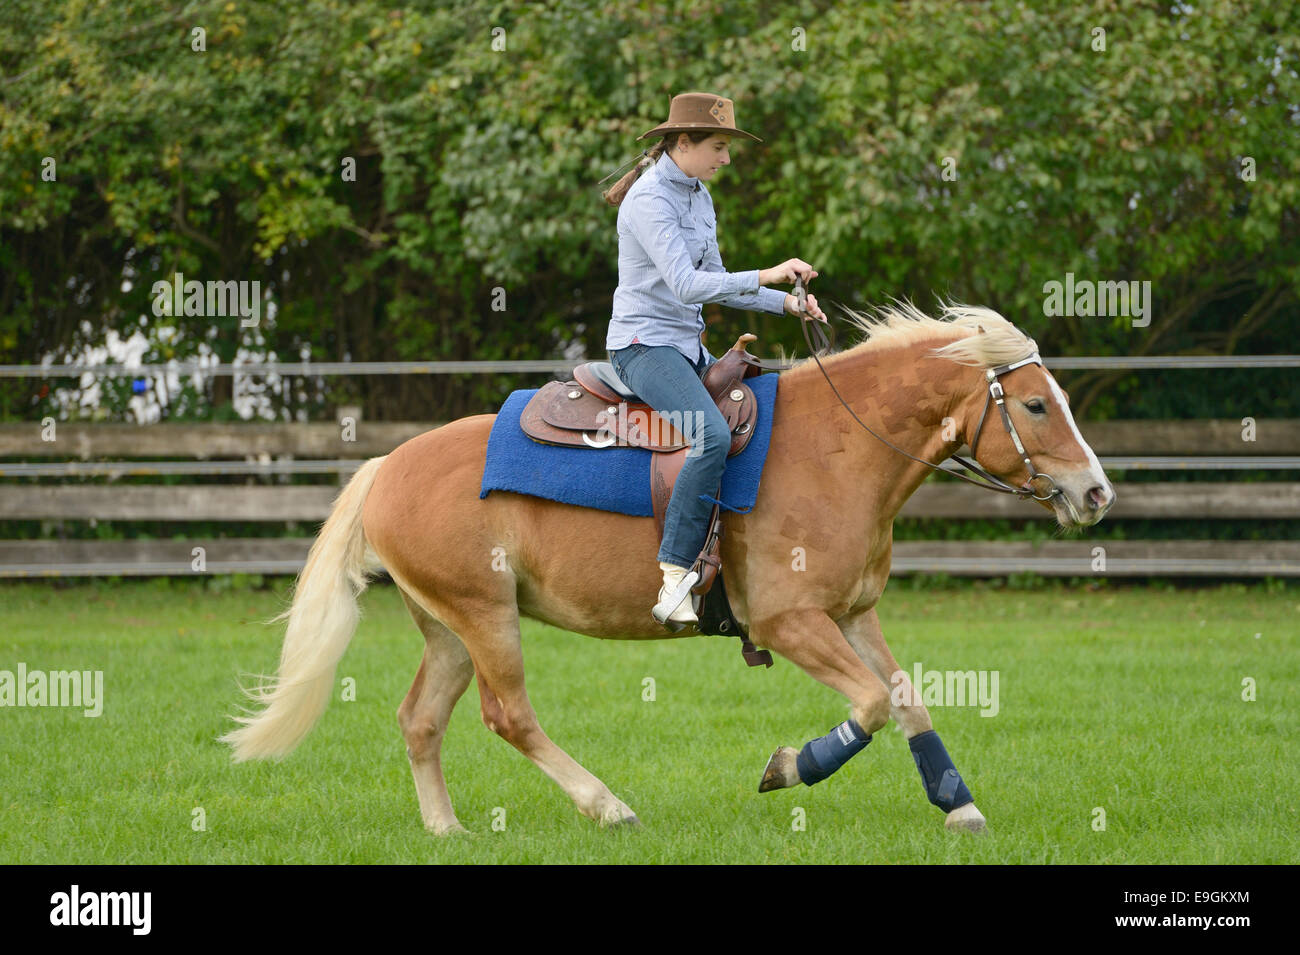 Rider on back of Haflinger horse cantering Stock Photo